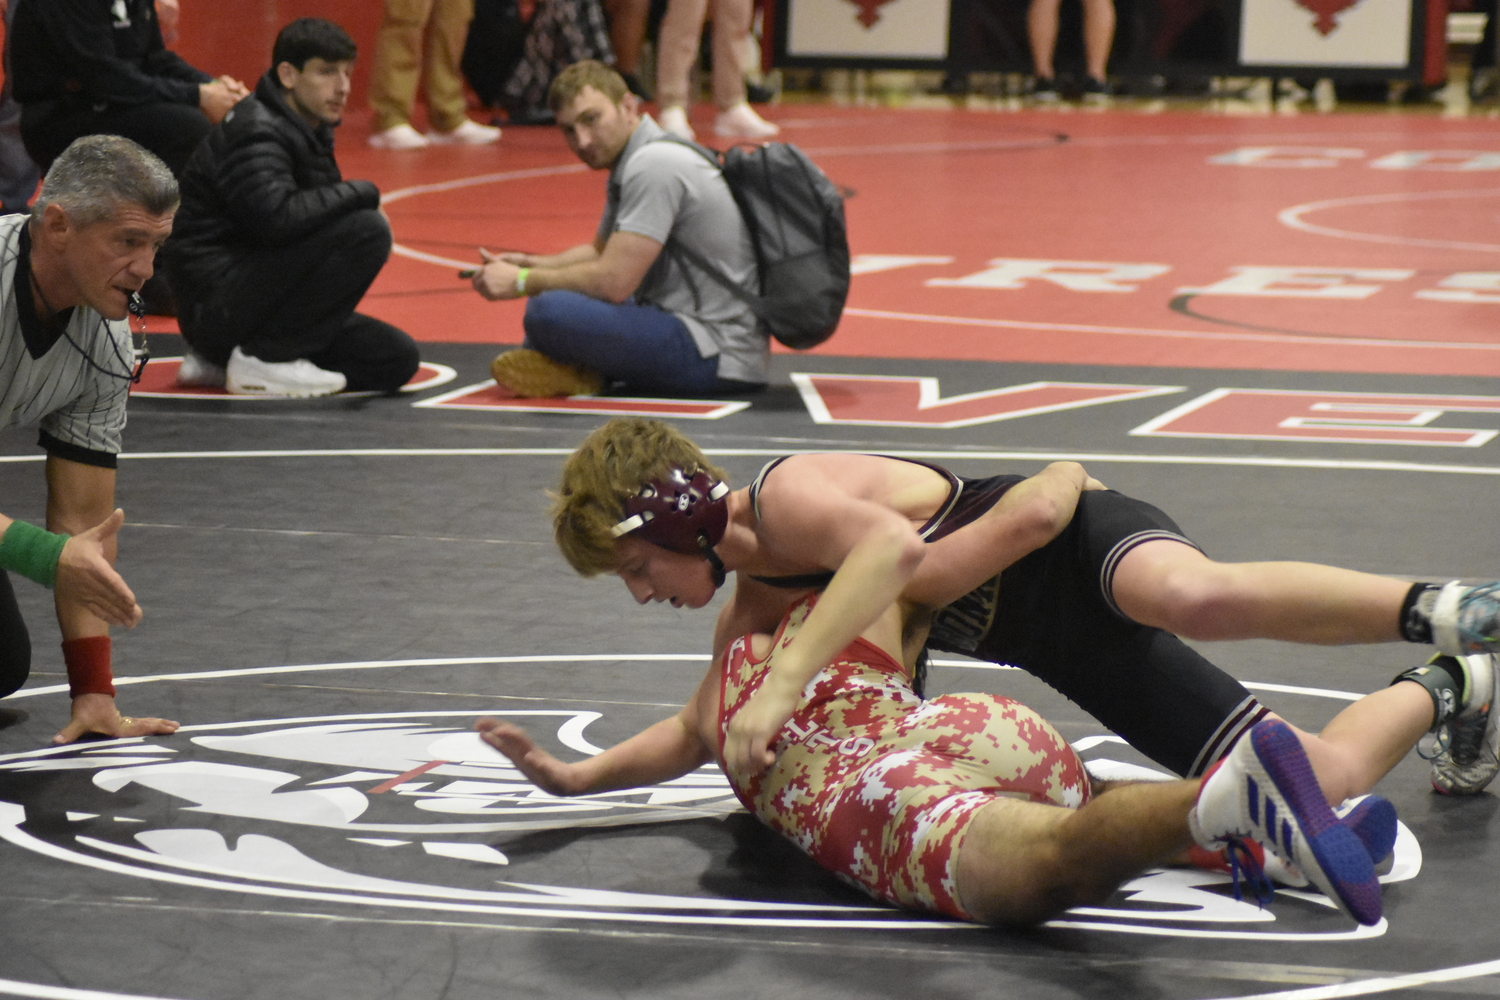 East Hampton's Caleb Mott defeated his Hills West opponent to stay alive in the wrestlebacks.   DREW BUDD